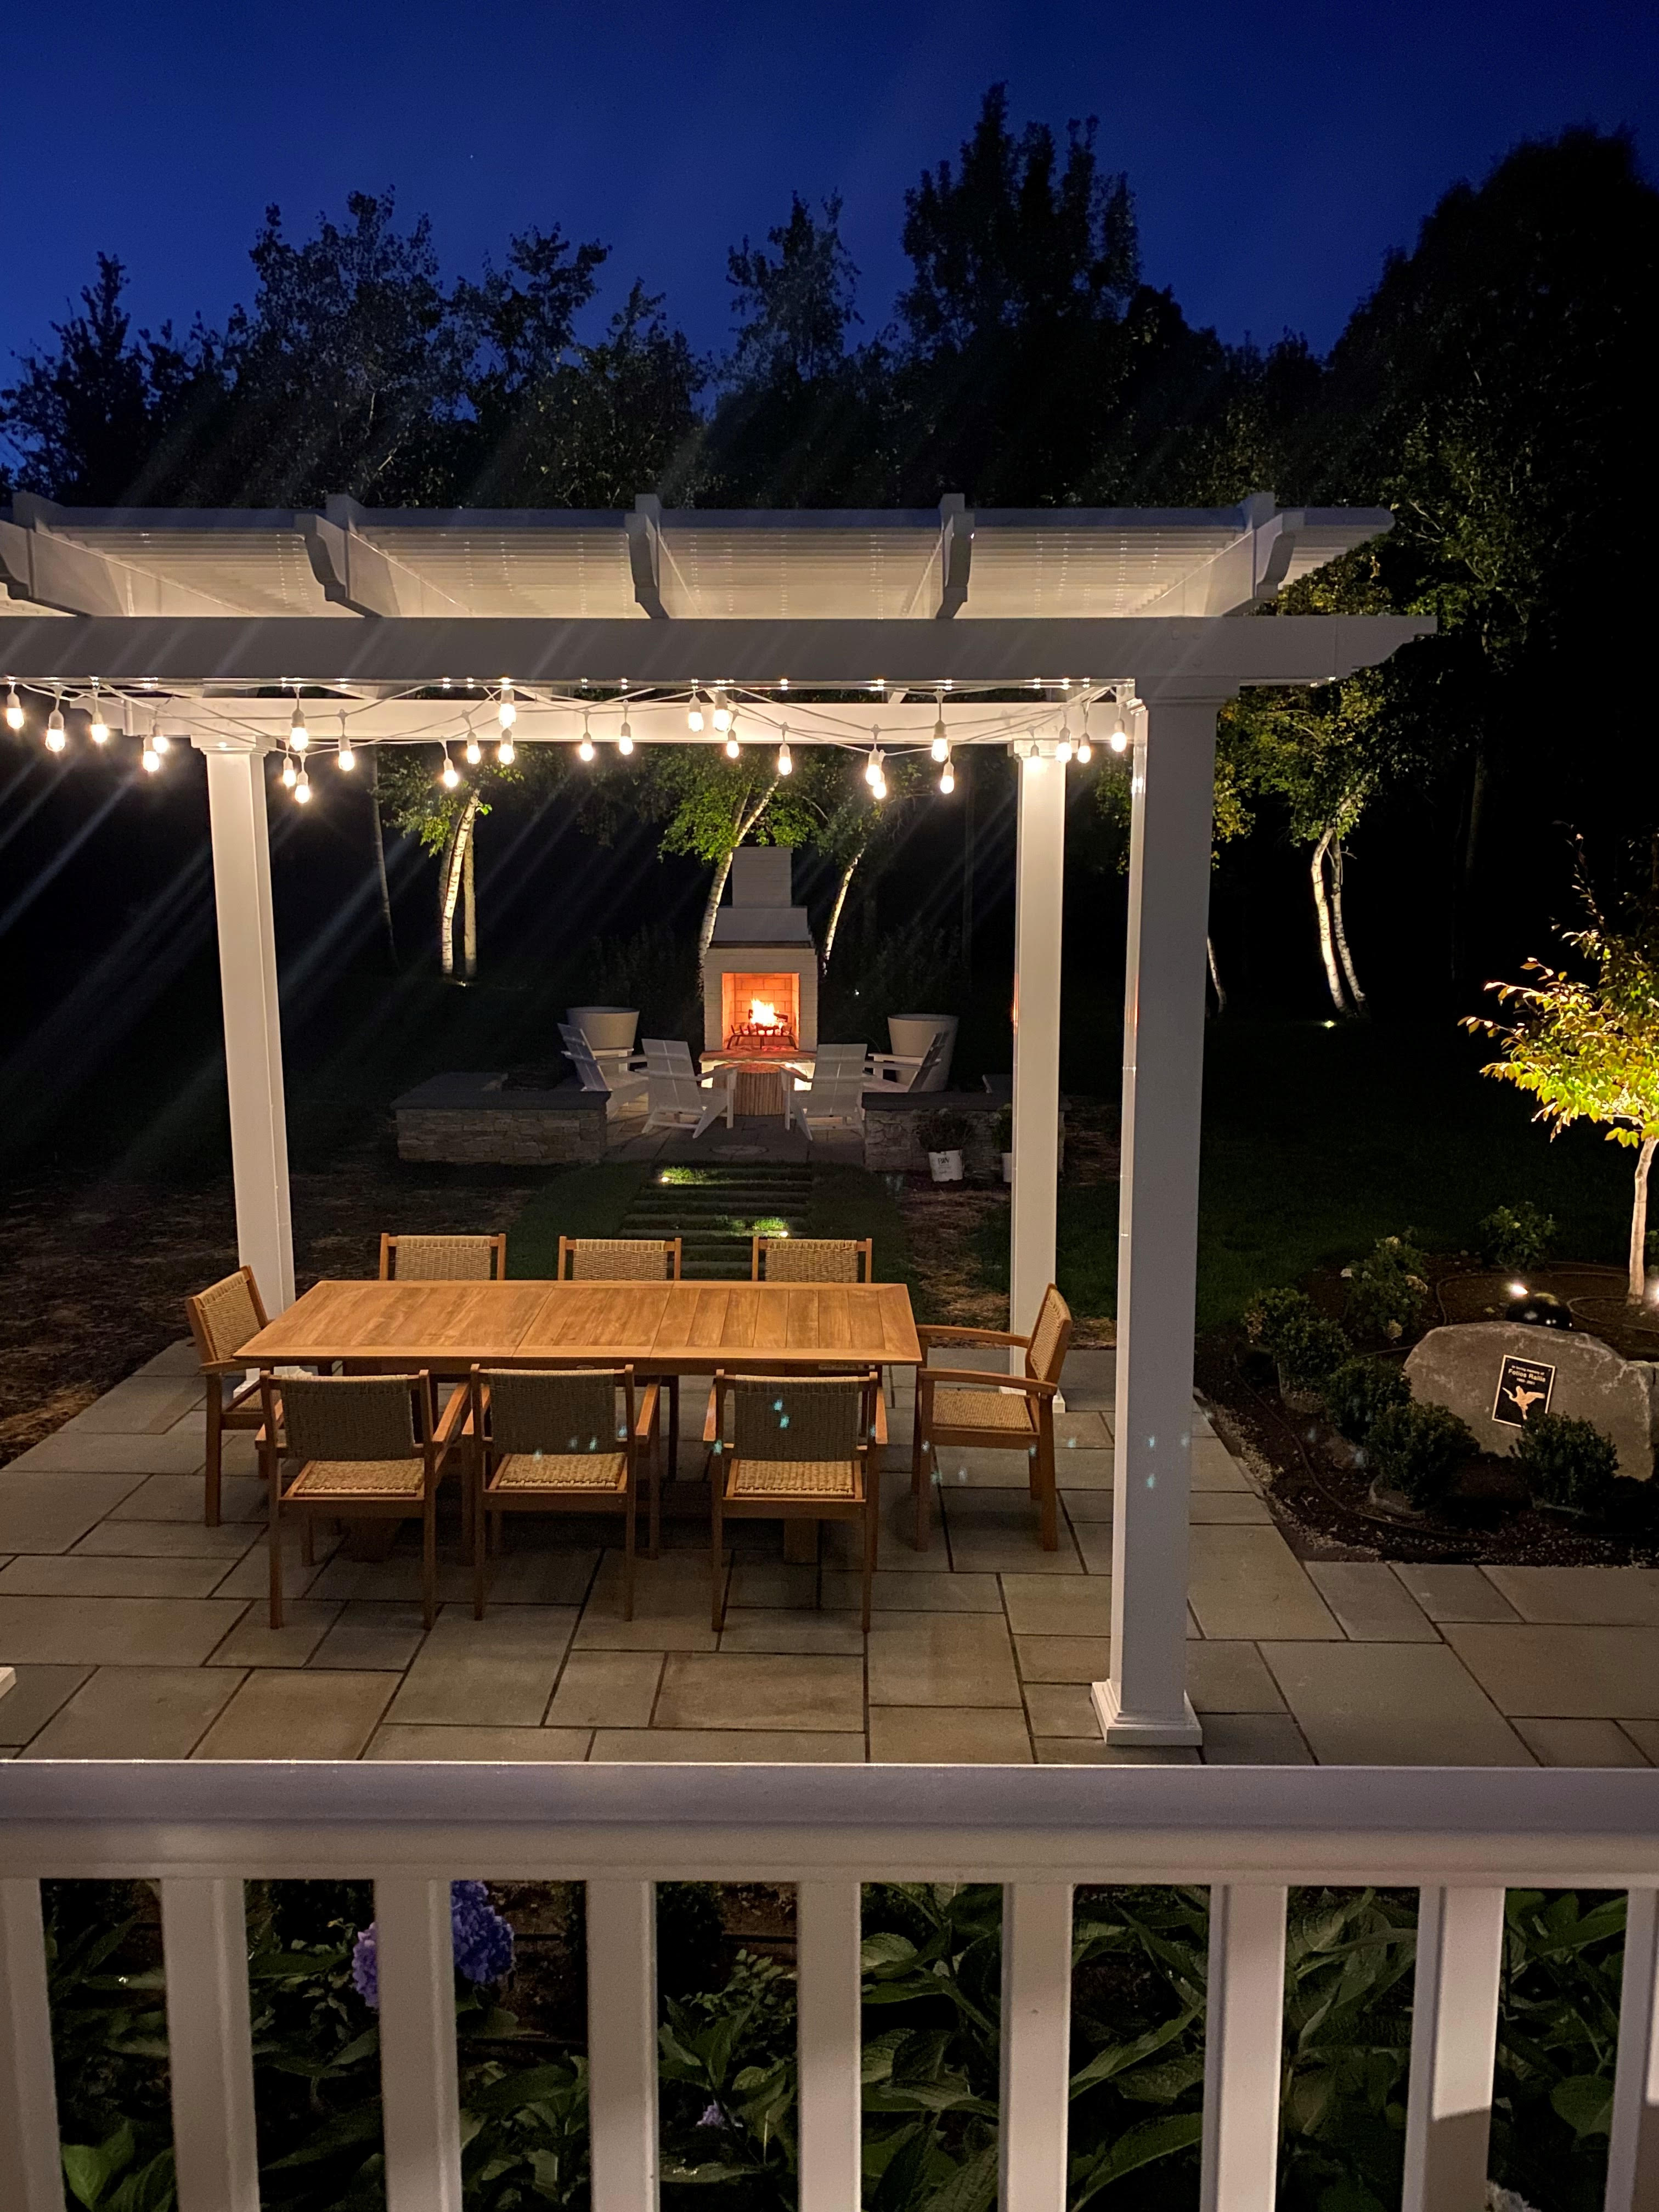 Horizon Table and dining chairs under a pergola gazebo